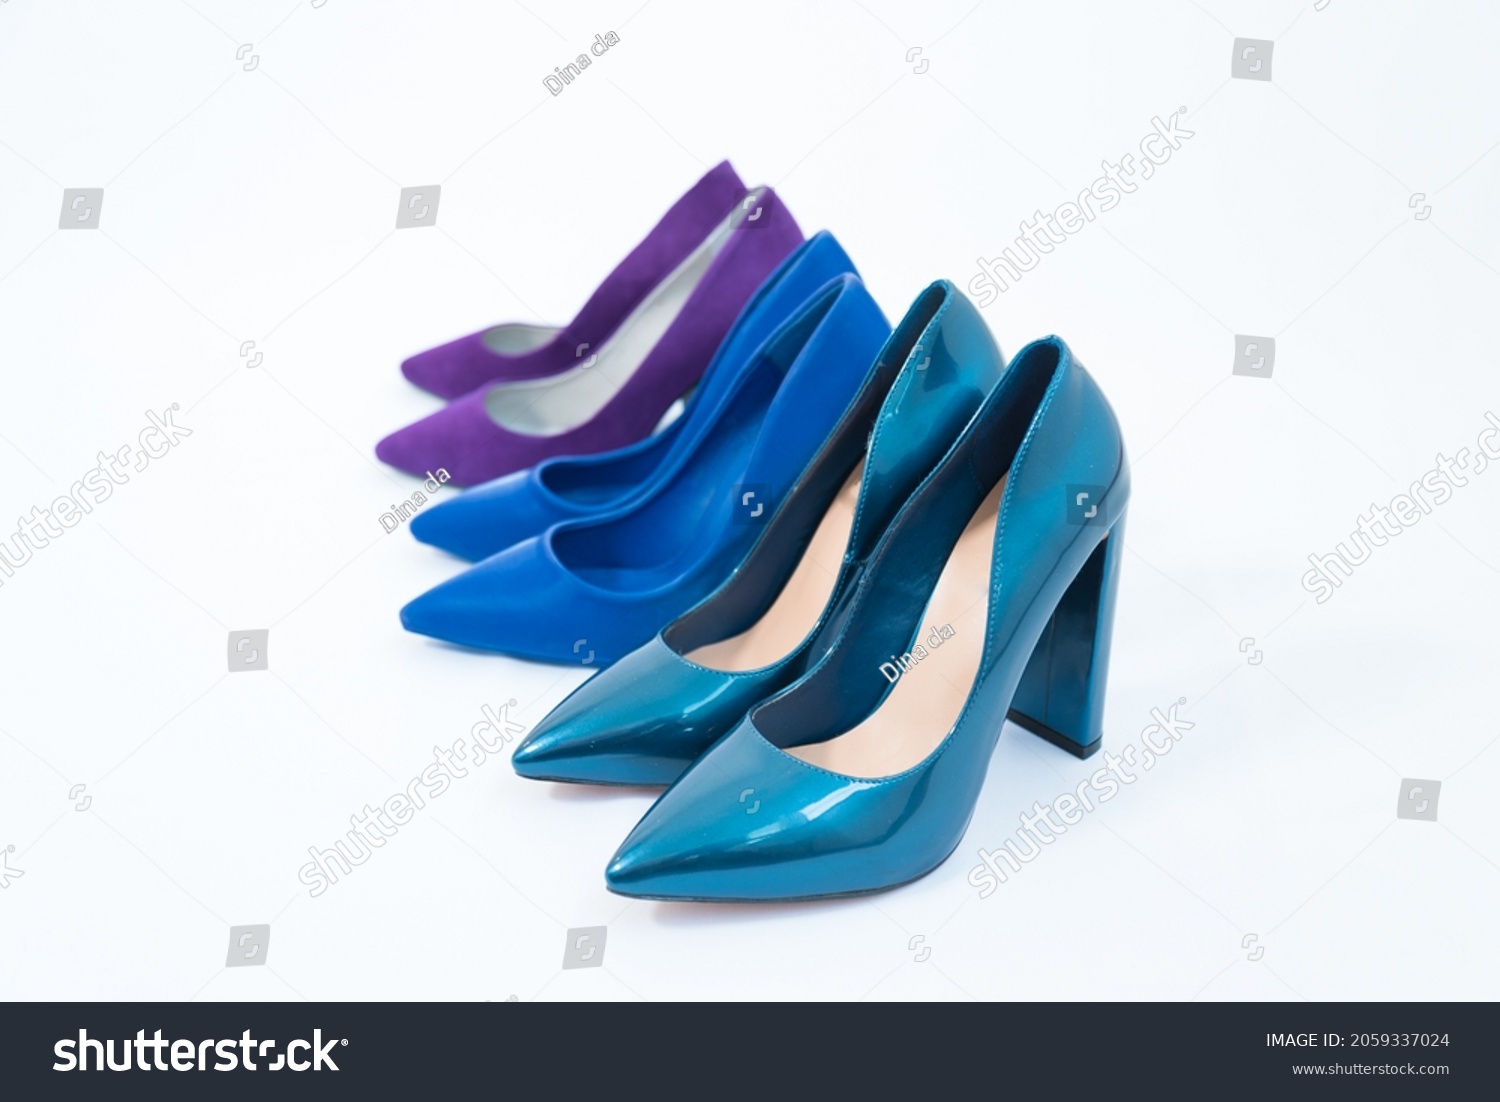 Three pairs of blue women's shoes. High-heeled shoes. One pair of thin heels, stiletto heels. The second pair has a stable, wide heel. Fashionable stylish shoes. Variety of colors #2059337024